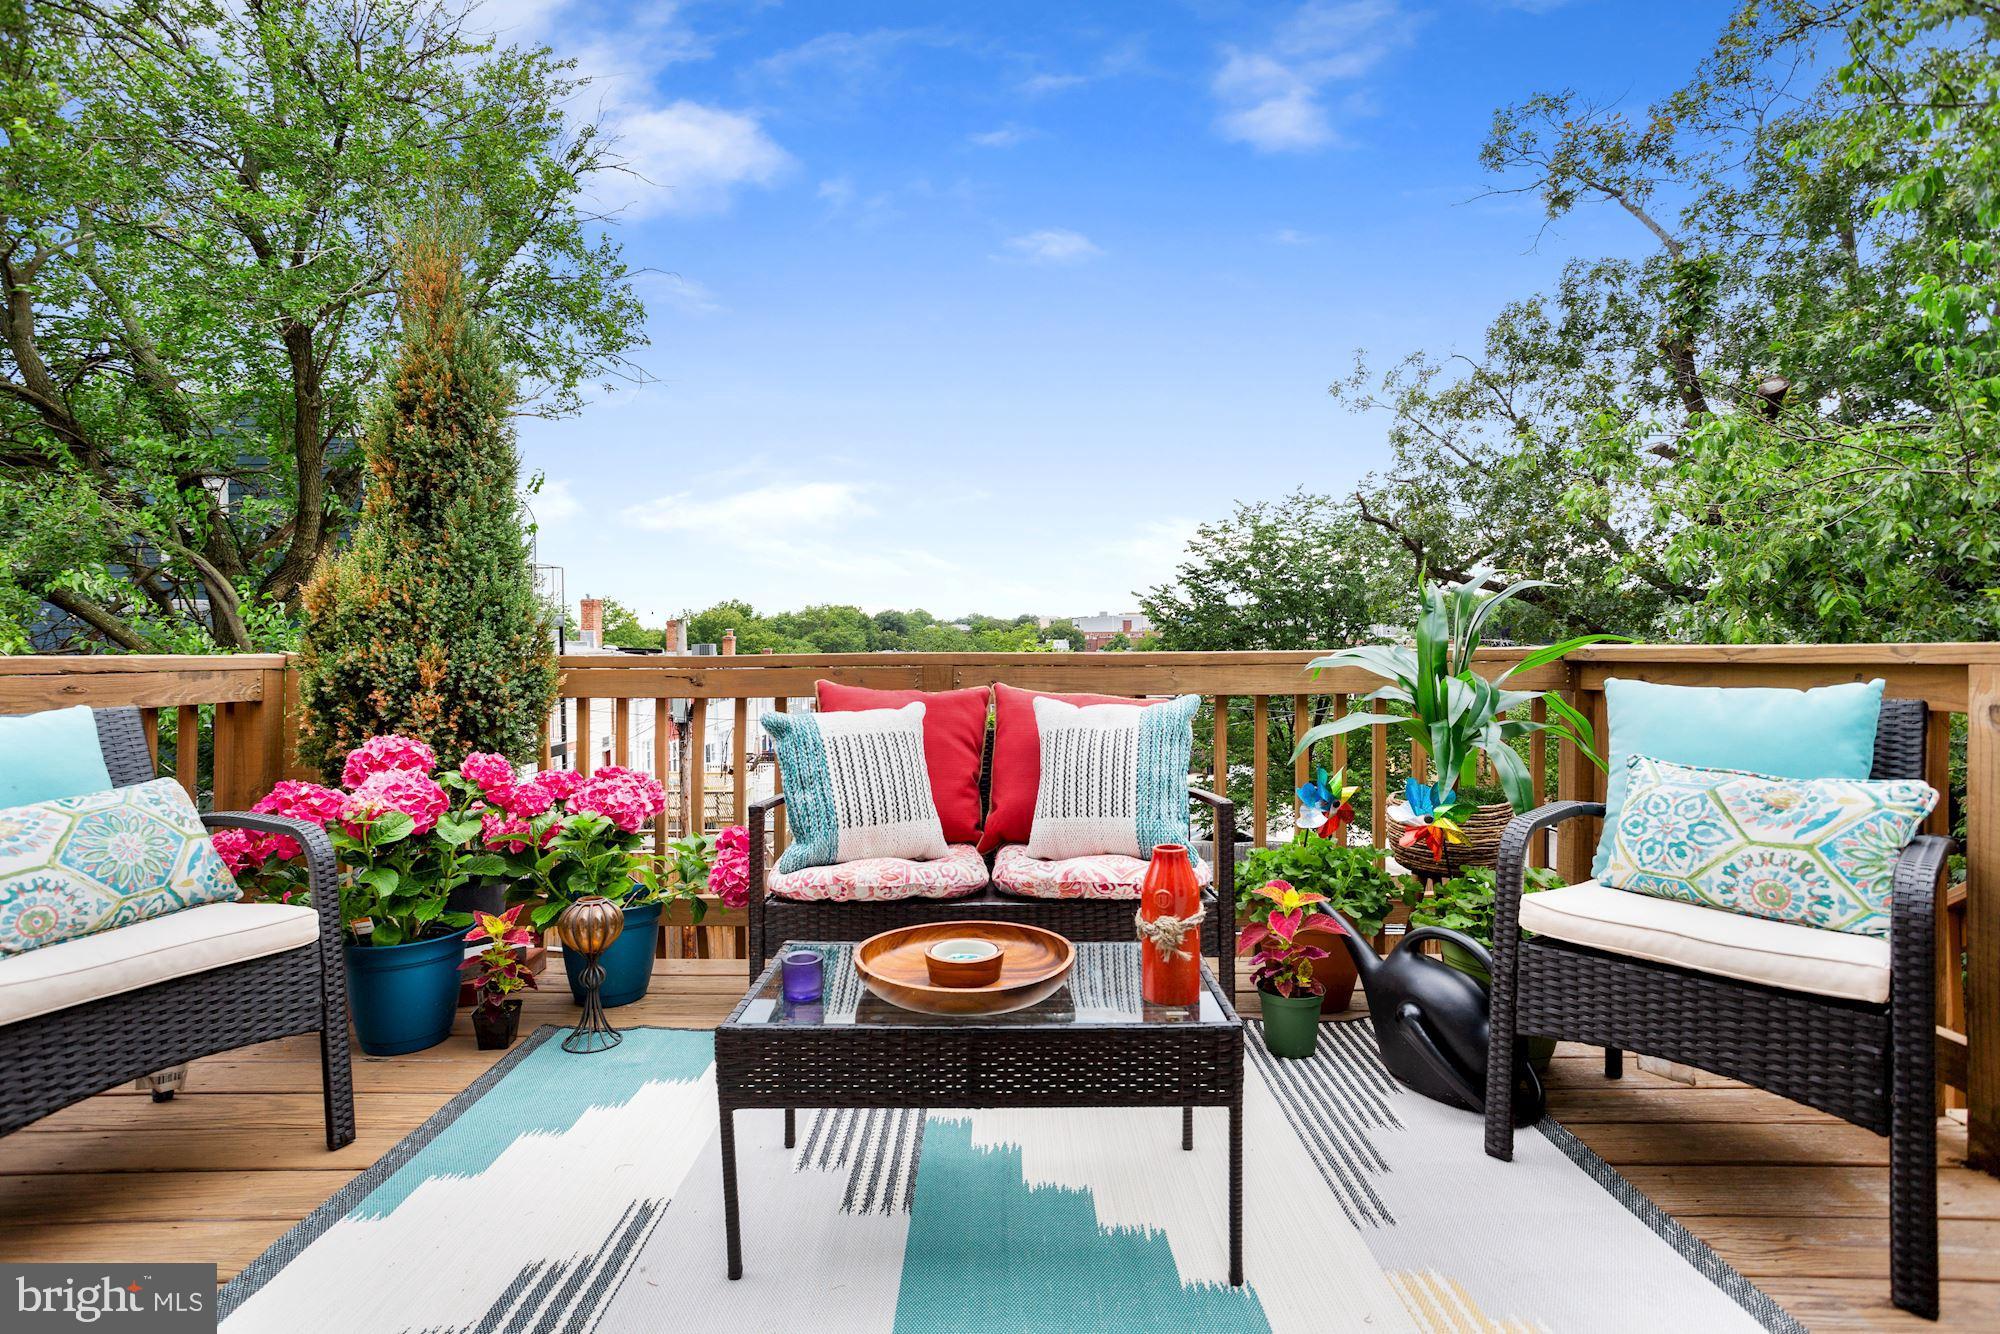 a outdoor living space with furniture and flowers